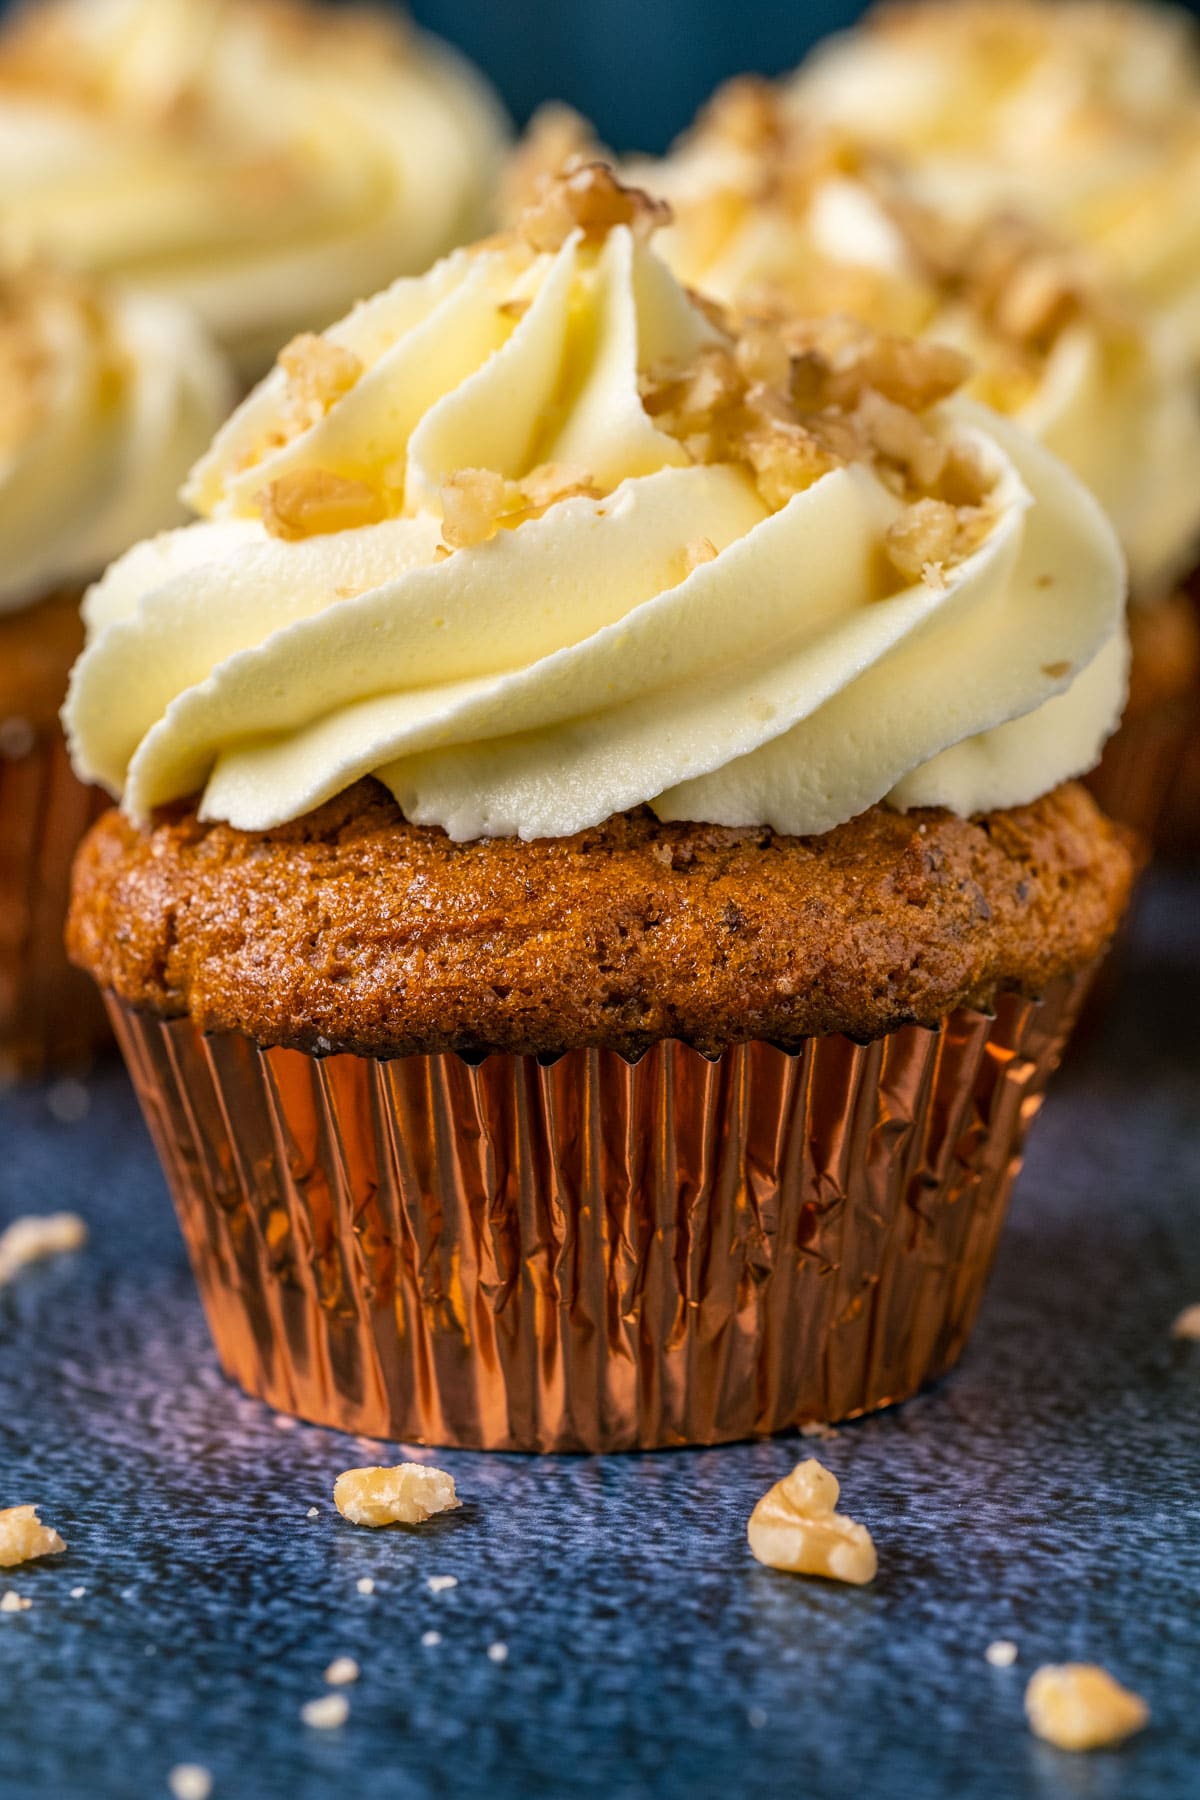 Gluten free carrot cake cupcakes topped with frosting and chopped walnuts.